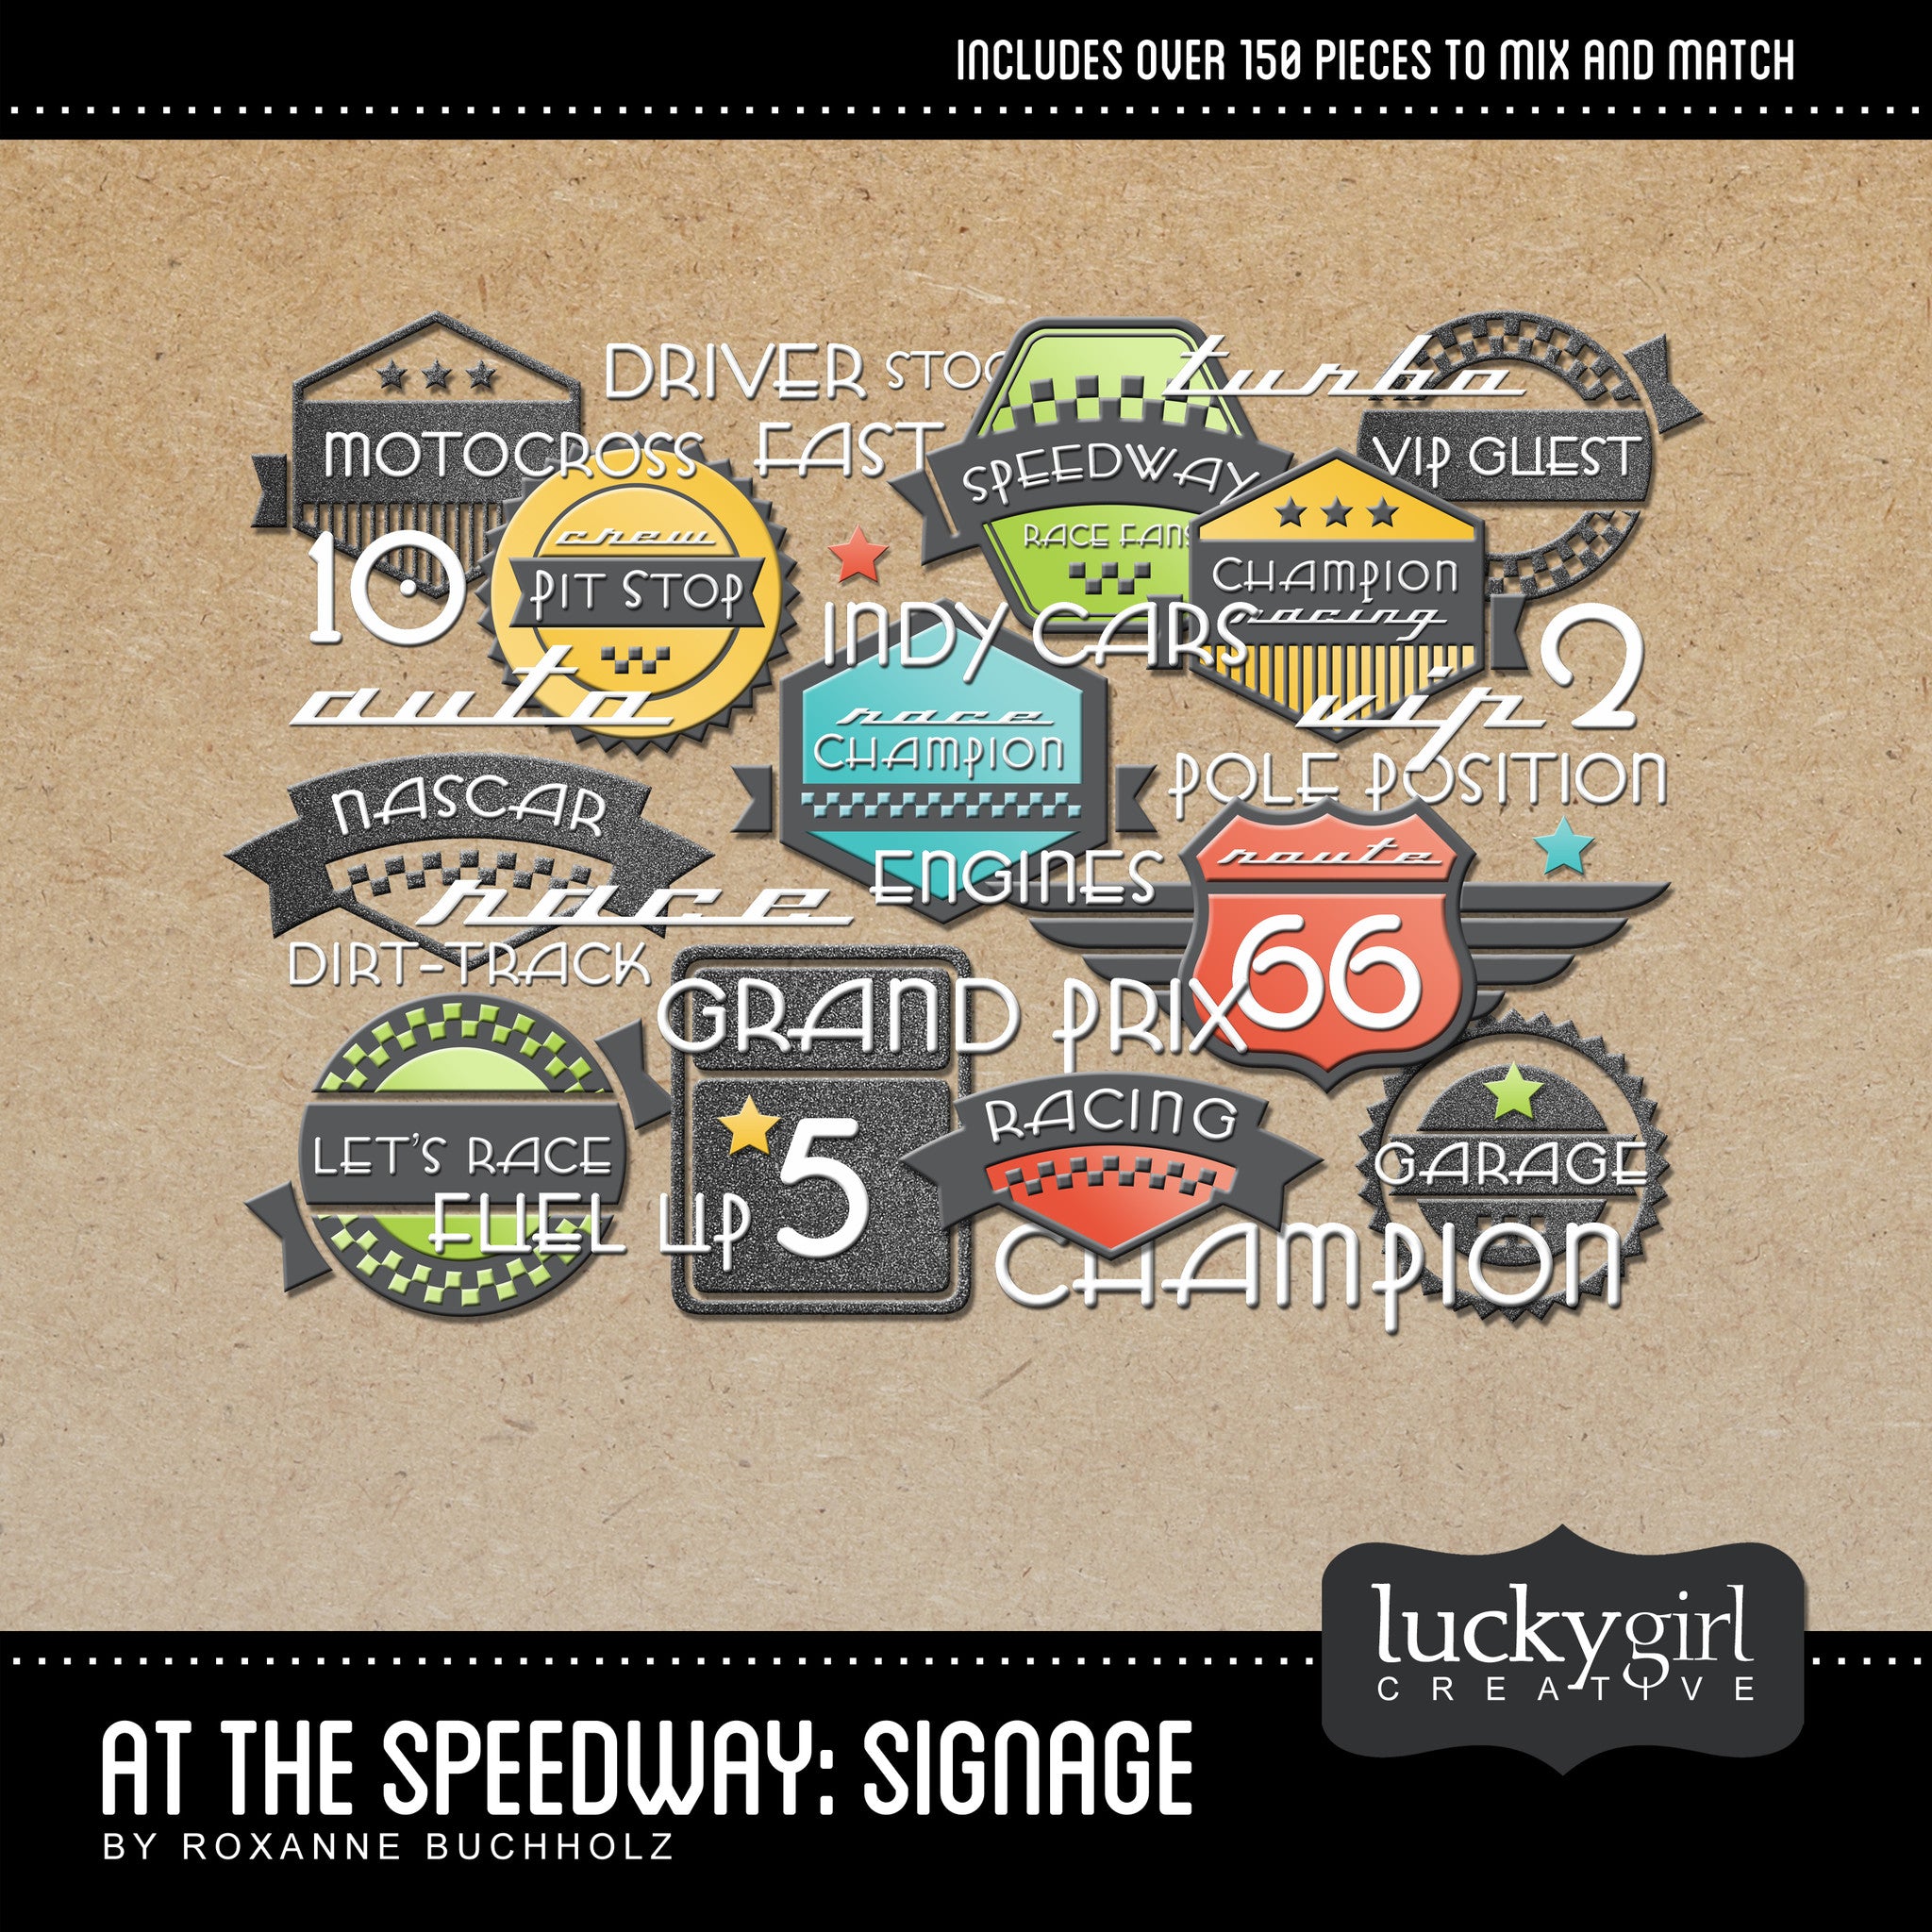 At the Speedway Signage Digital Scrapbook Kit contains digital art labels, stamps, word art, and everything you could want to create your own custom word art and titles. The style and colors coordinate perfectly with the rest of the At the Speedway Digital Scrapbook Kit collections.